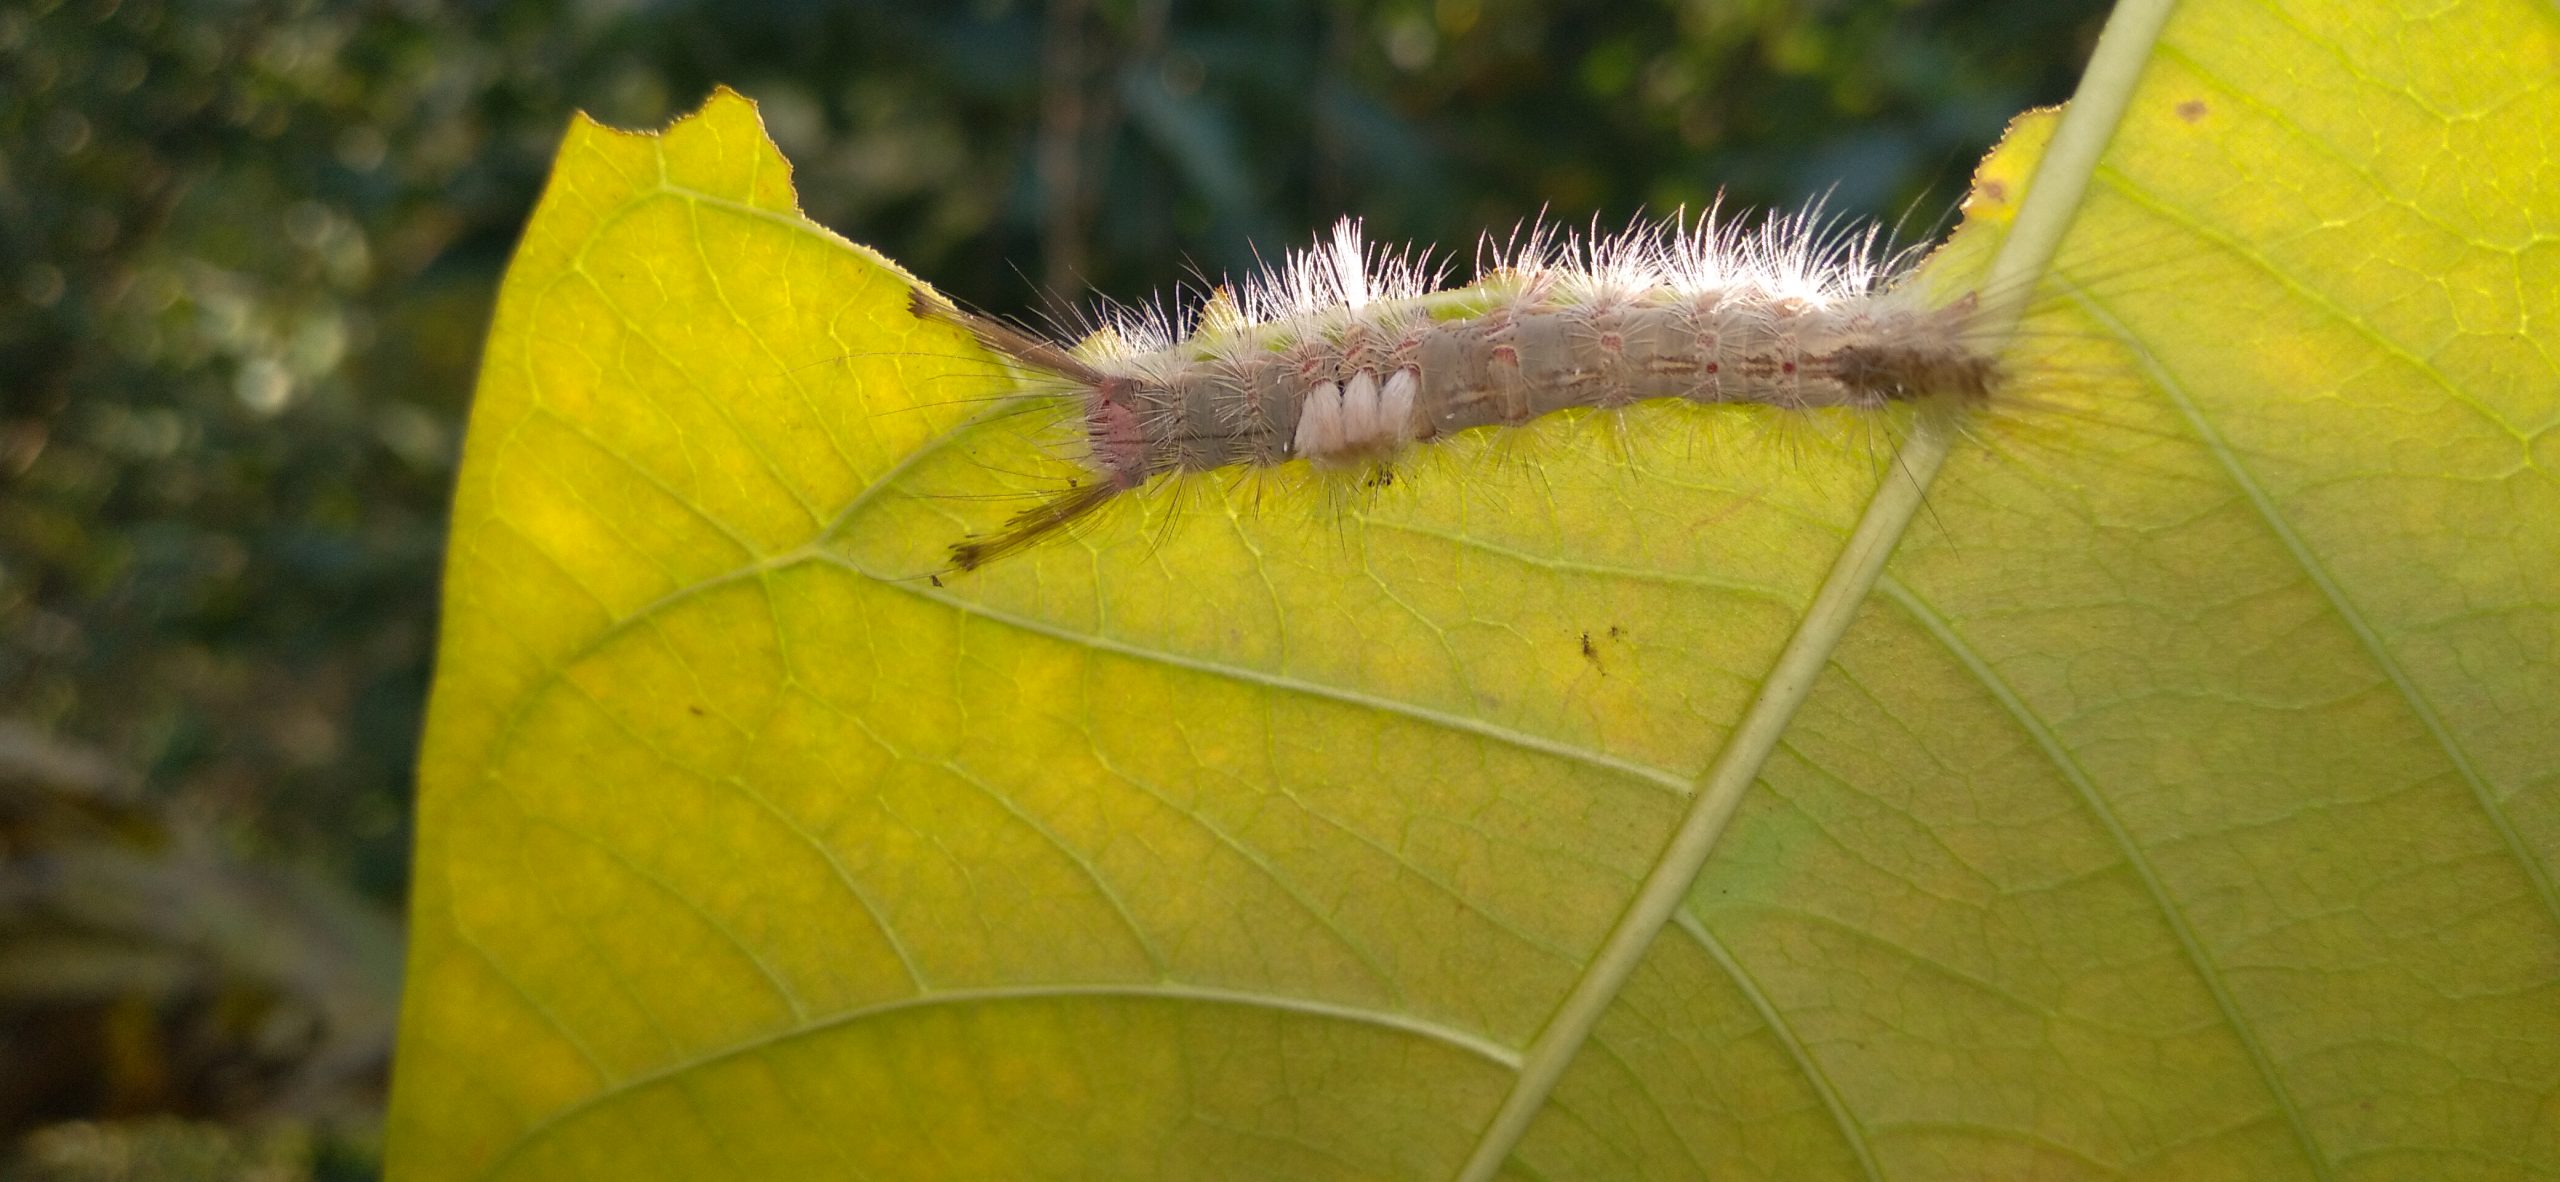 Caterpiller sitting on a leaf